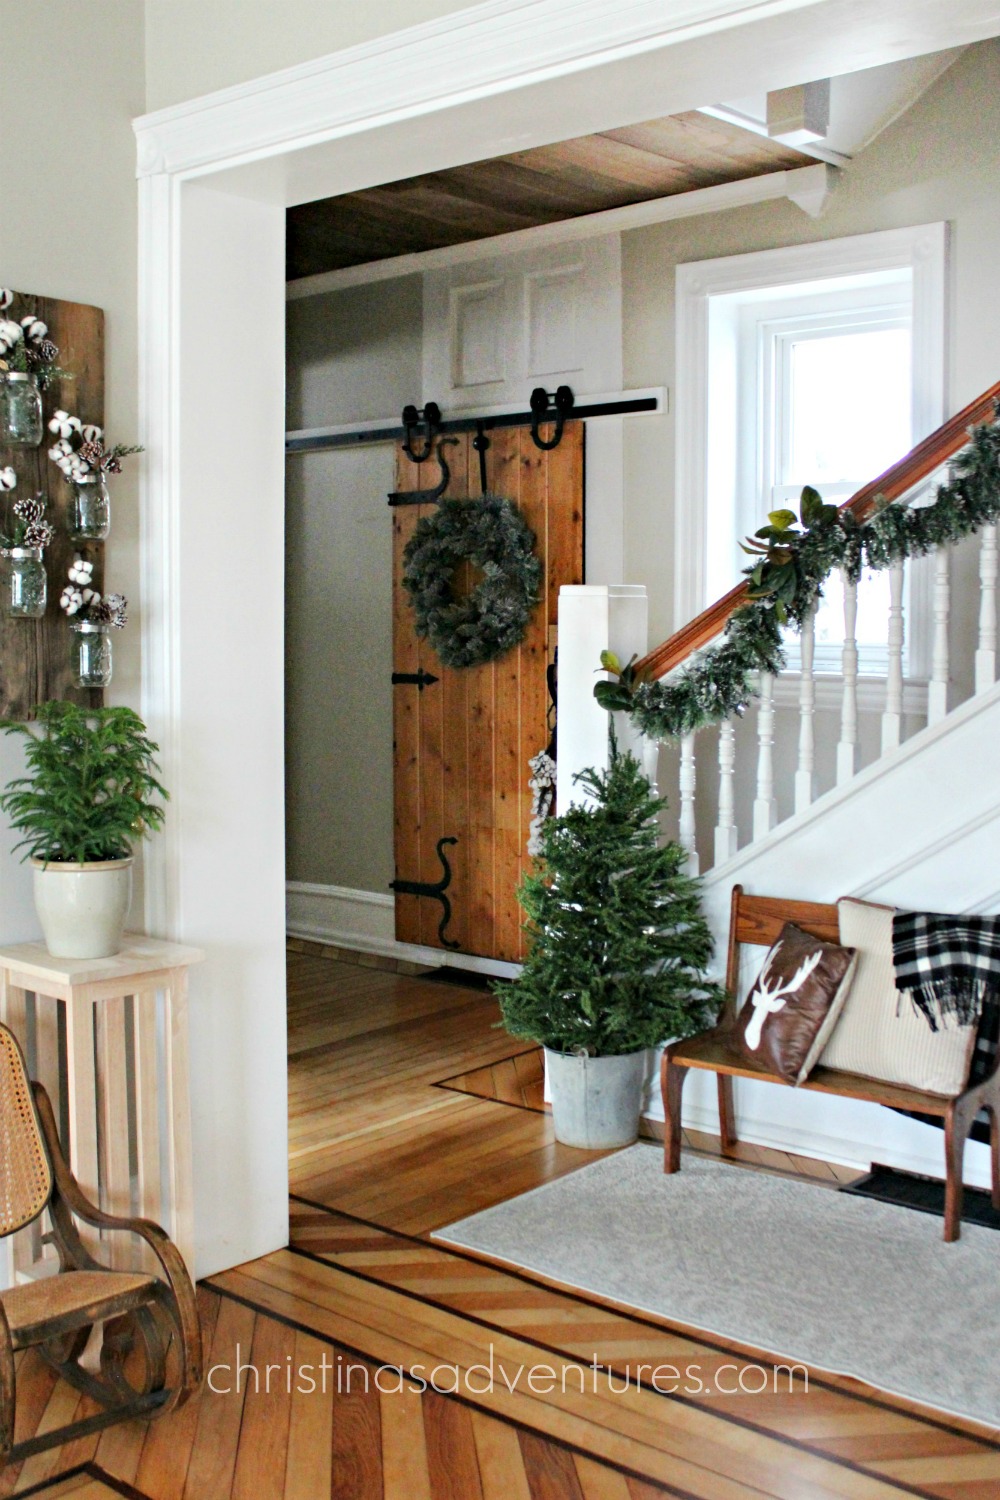 Transitioning from Christmas to Winter decor